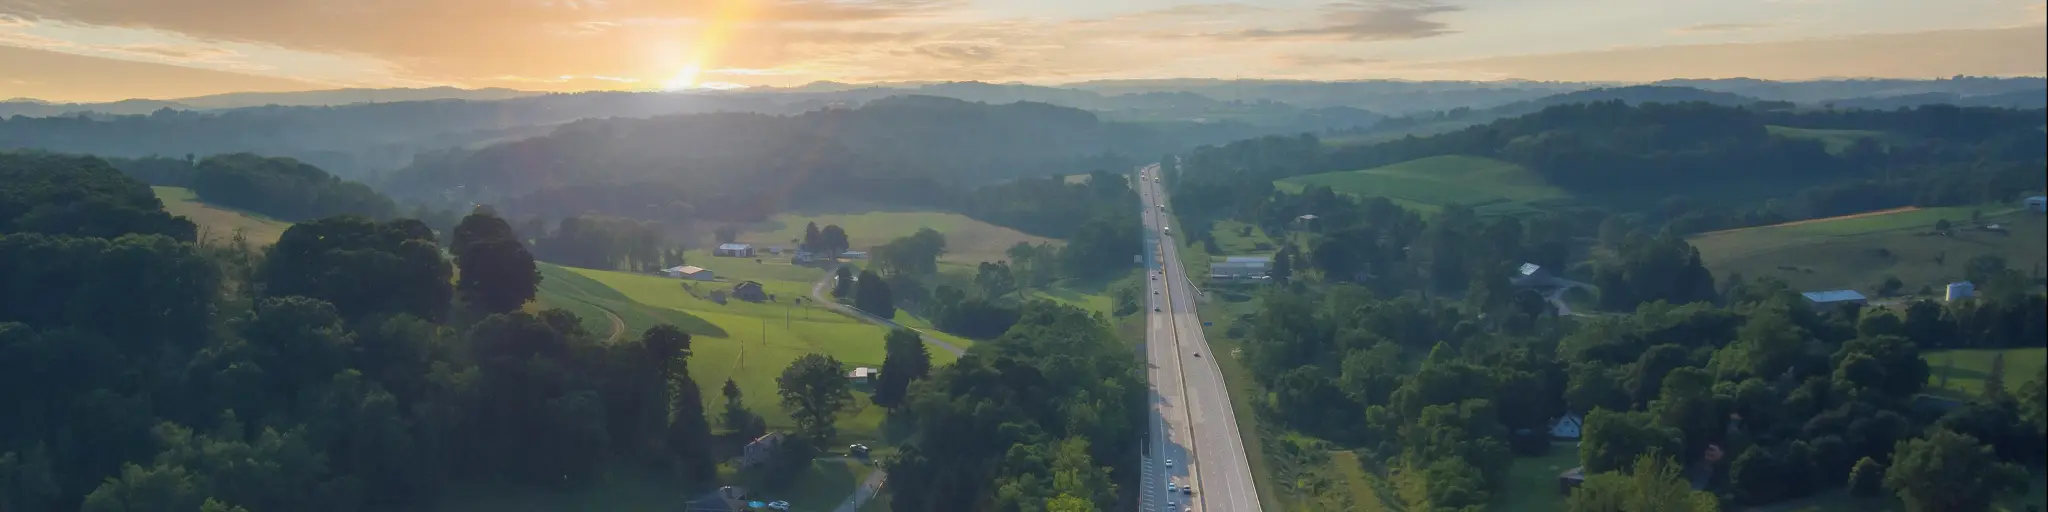 Aerial view of Interstate 70 in Pennsylvania during sunset